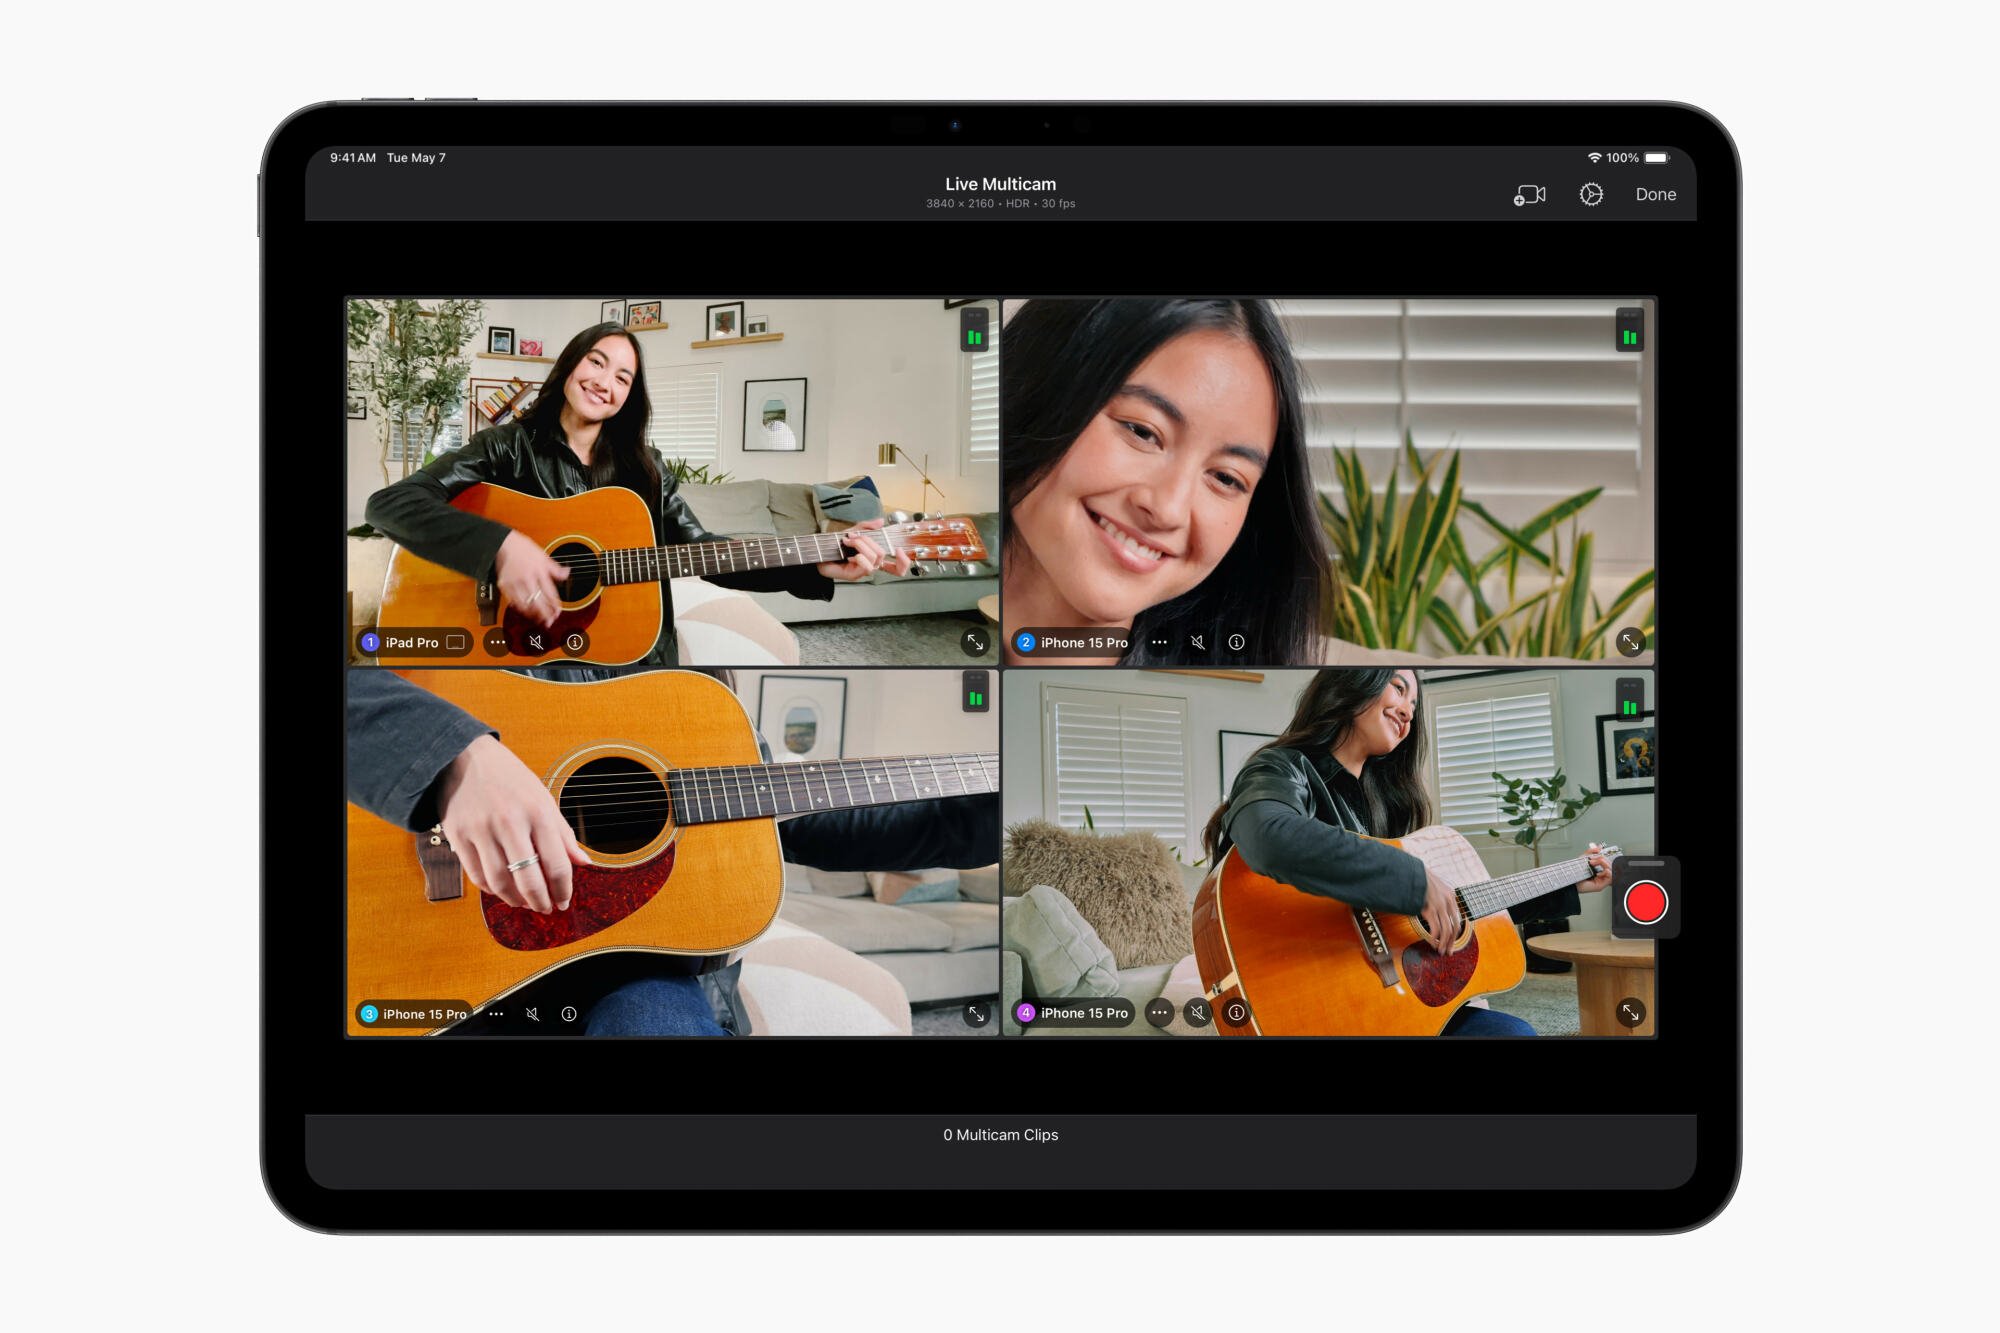 Apple iPad Pro with Final Cut Pro on it showing multicam feature